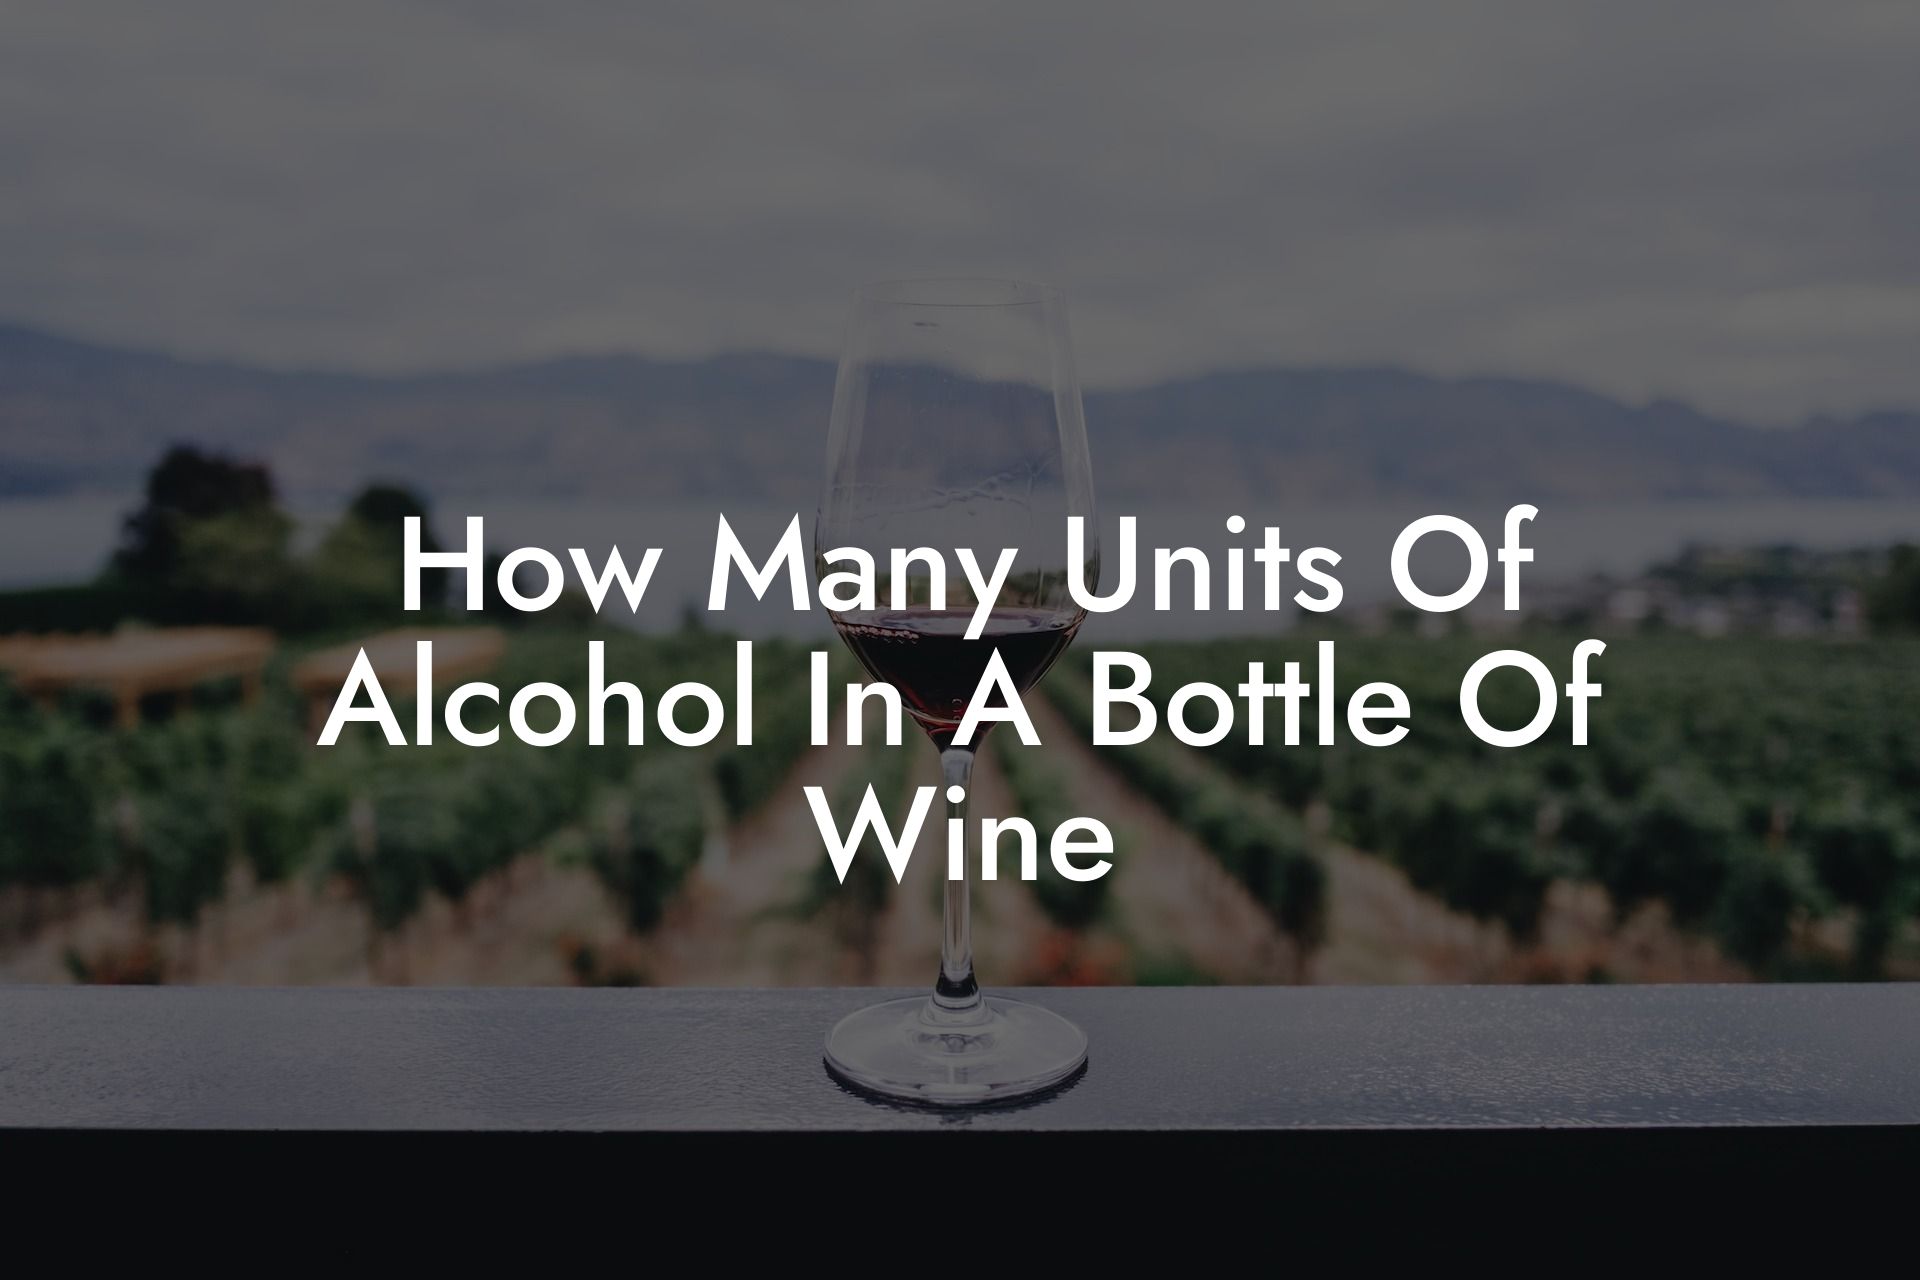 How Many Units Of Alcohol In A Bottle Of Wine